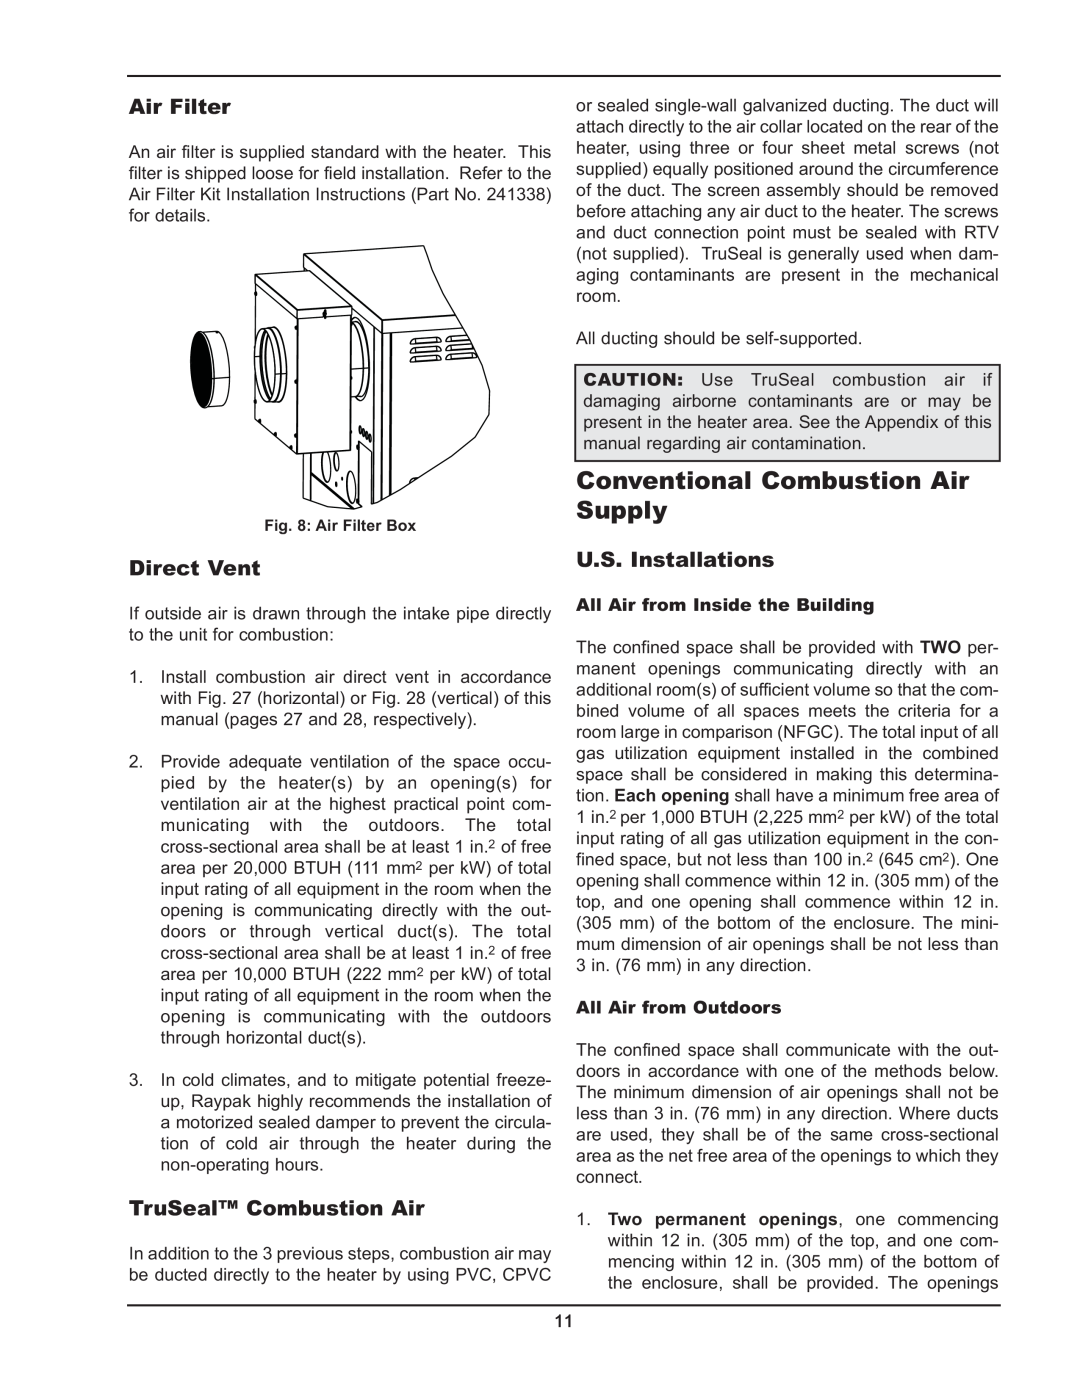 Raypak 503-2003 Conventional Combustion Air Supply, Air Filter, Direct Vent, TruSeal Combustion Air, U.S. Installations 